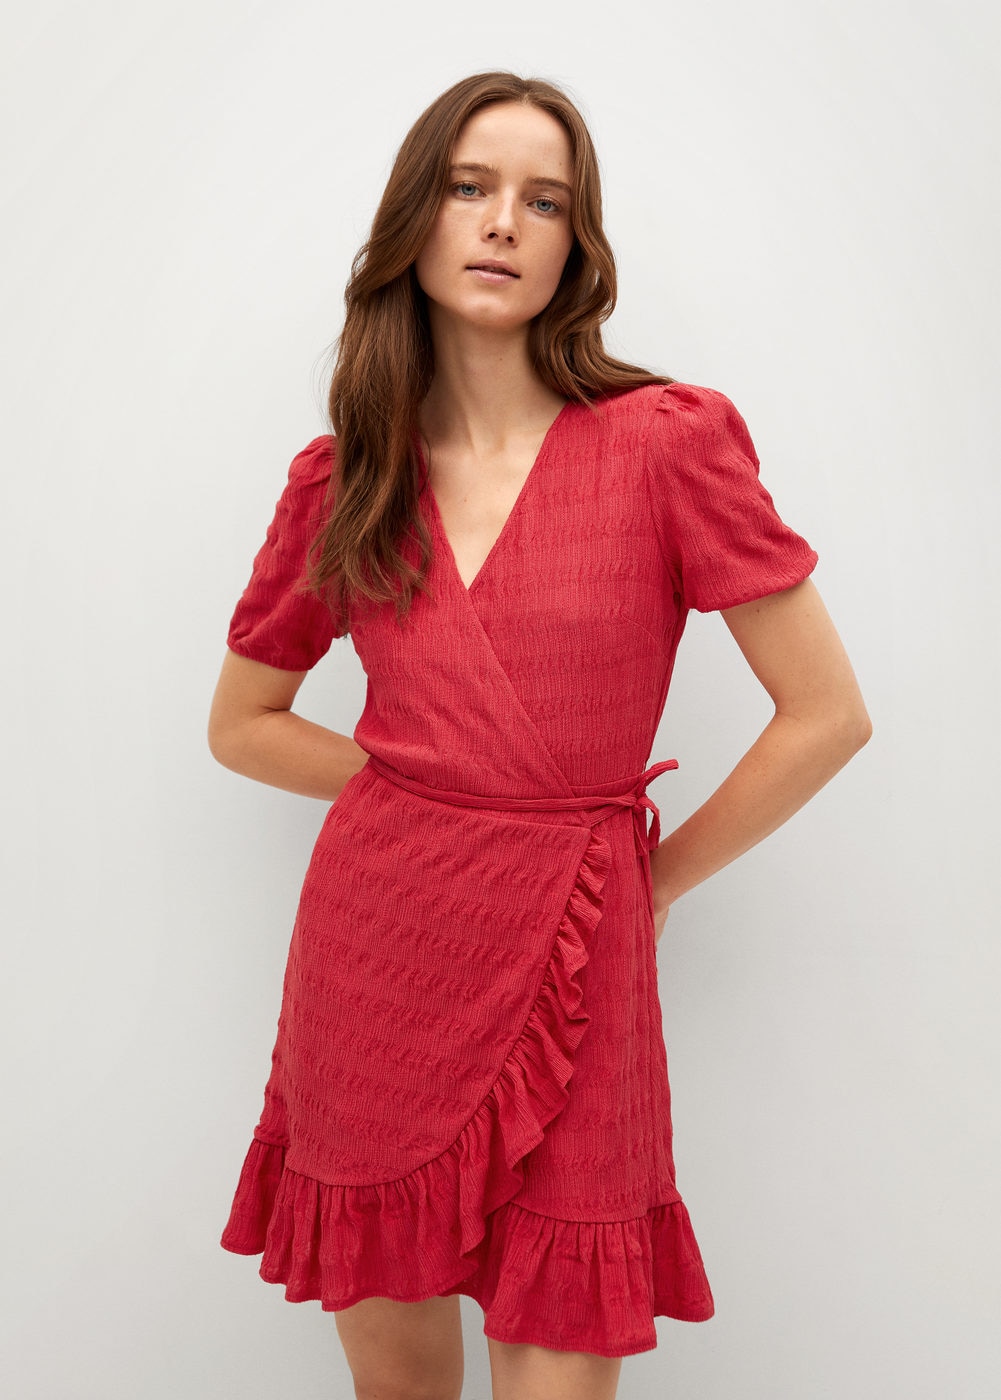 The 28 Best Casual Red Dresses Under $100 | Who What Wear